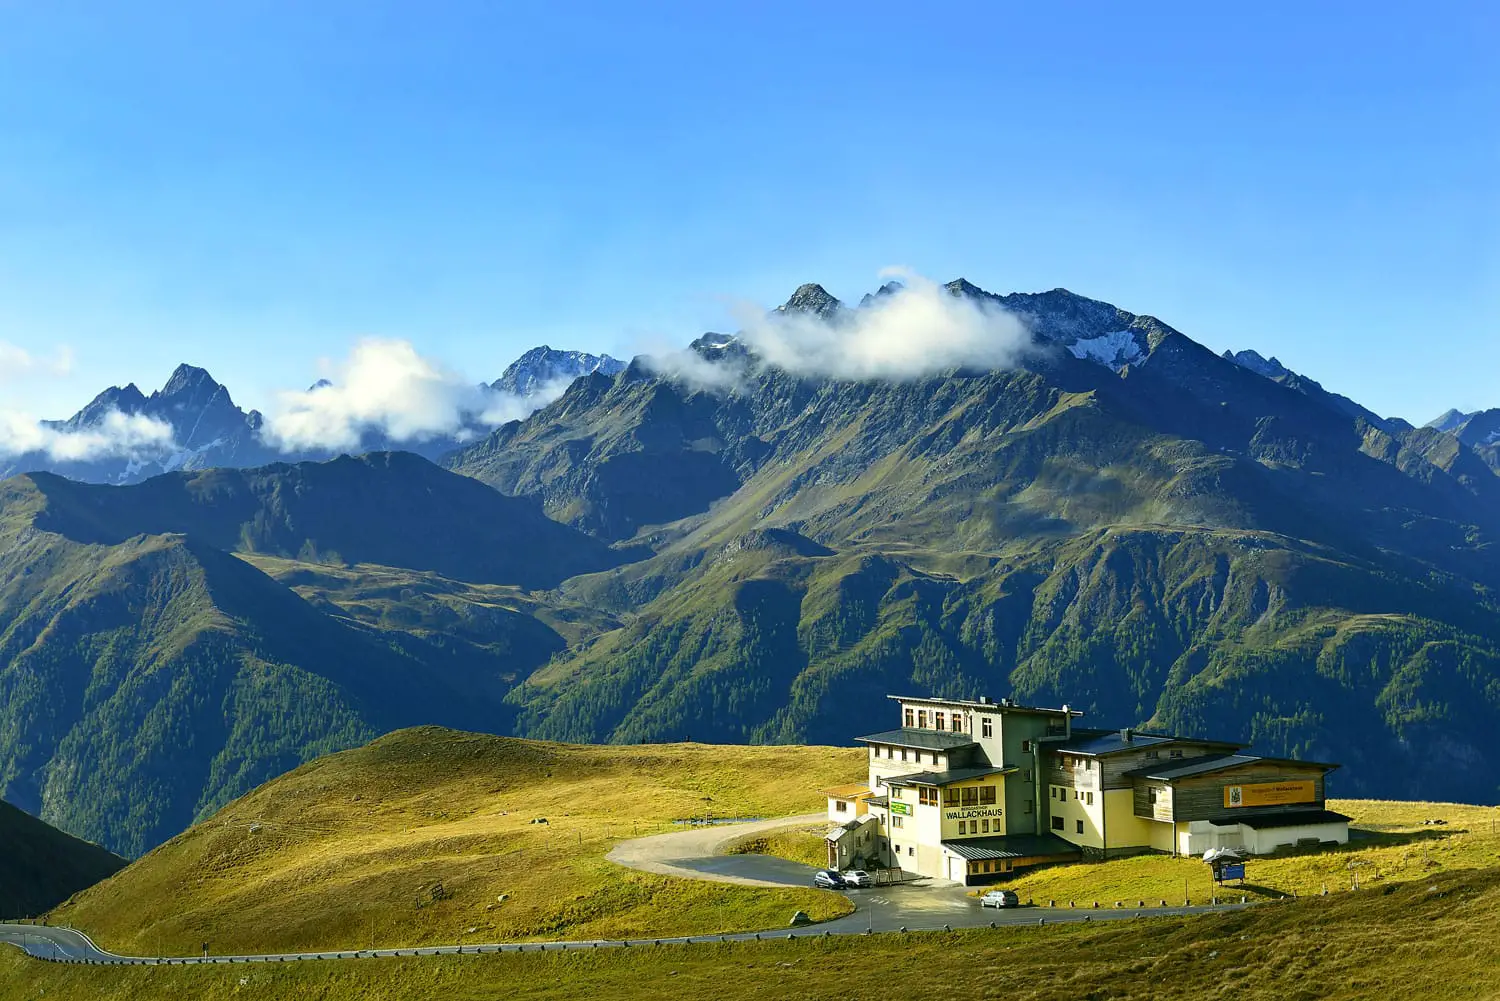  The Grossglockner high alpine road is the highest mountain road in Austria